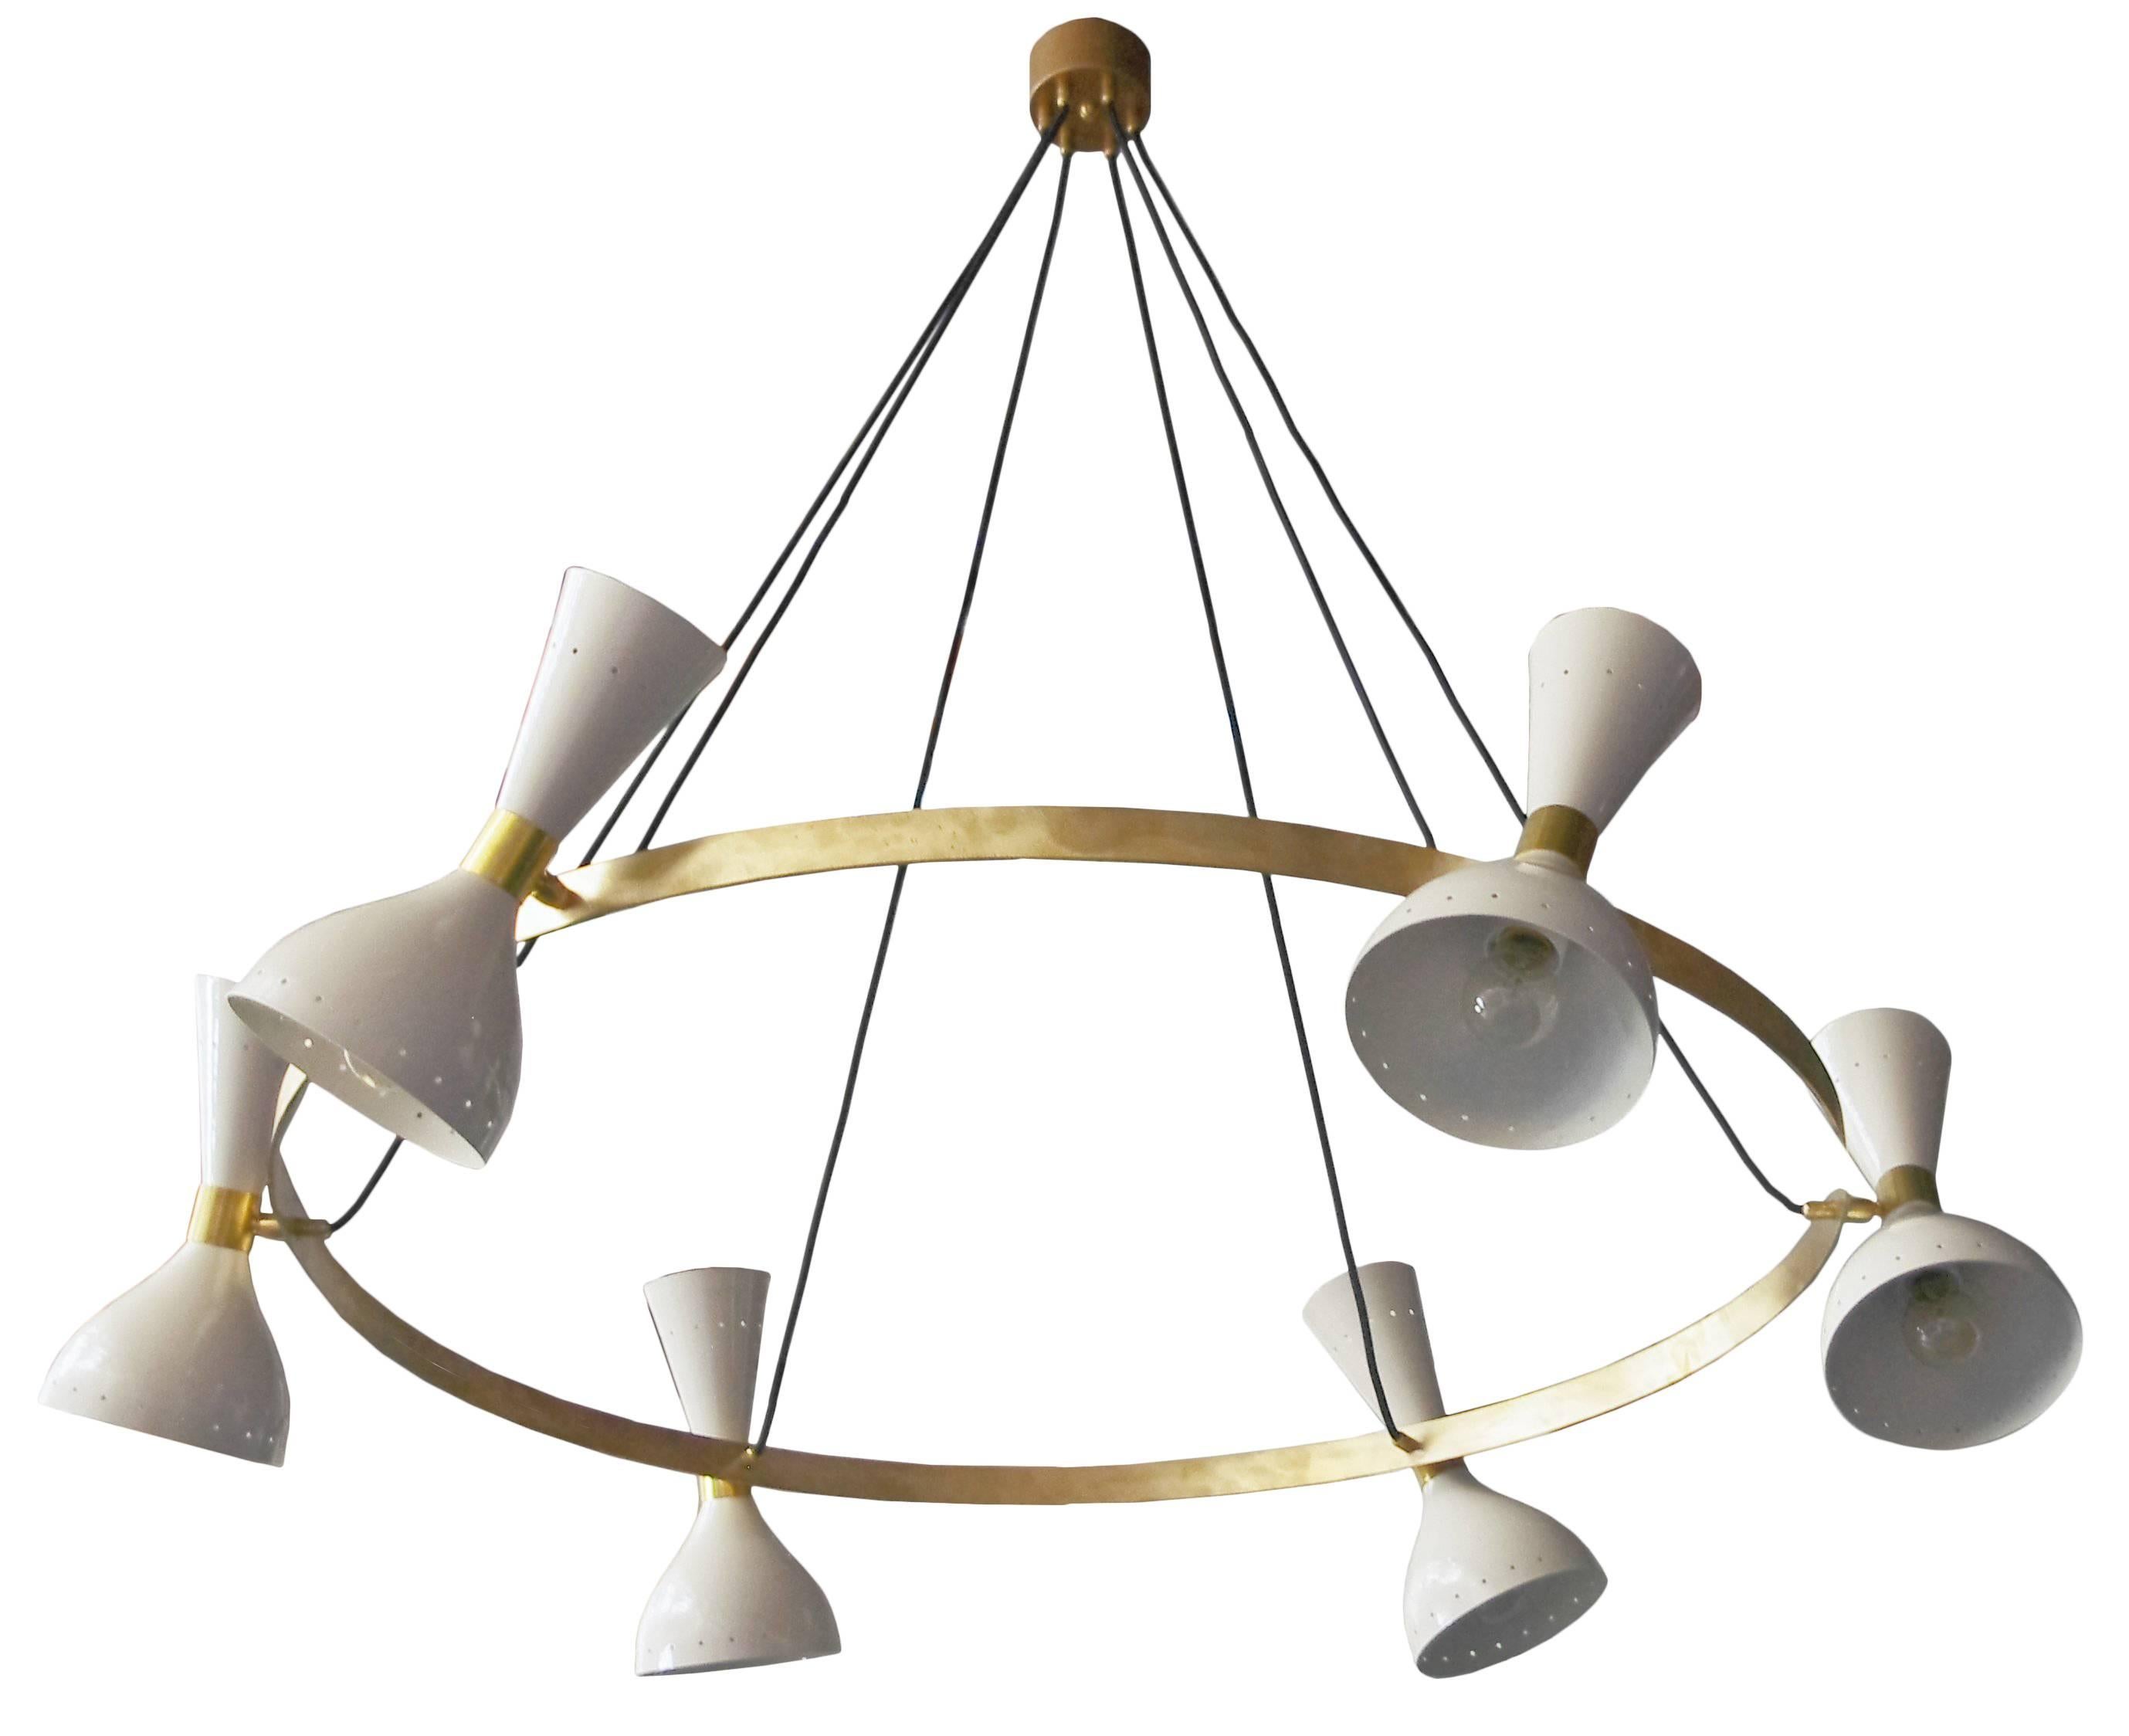 Chic Italian chandeliers with enameled cream metal shades mounted on unlacquered brass frames, inspired by Stilnovo / Made in Italy
** Metal shades have minor scratches due to wear and tear **
12 lights in total: 6 lights are E12 type, 6 lights are